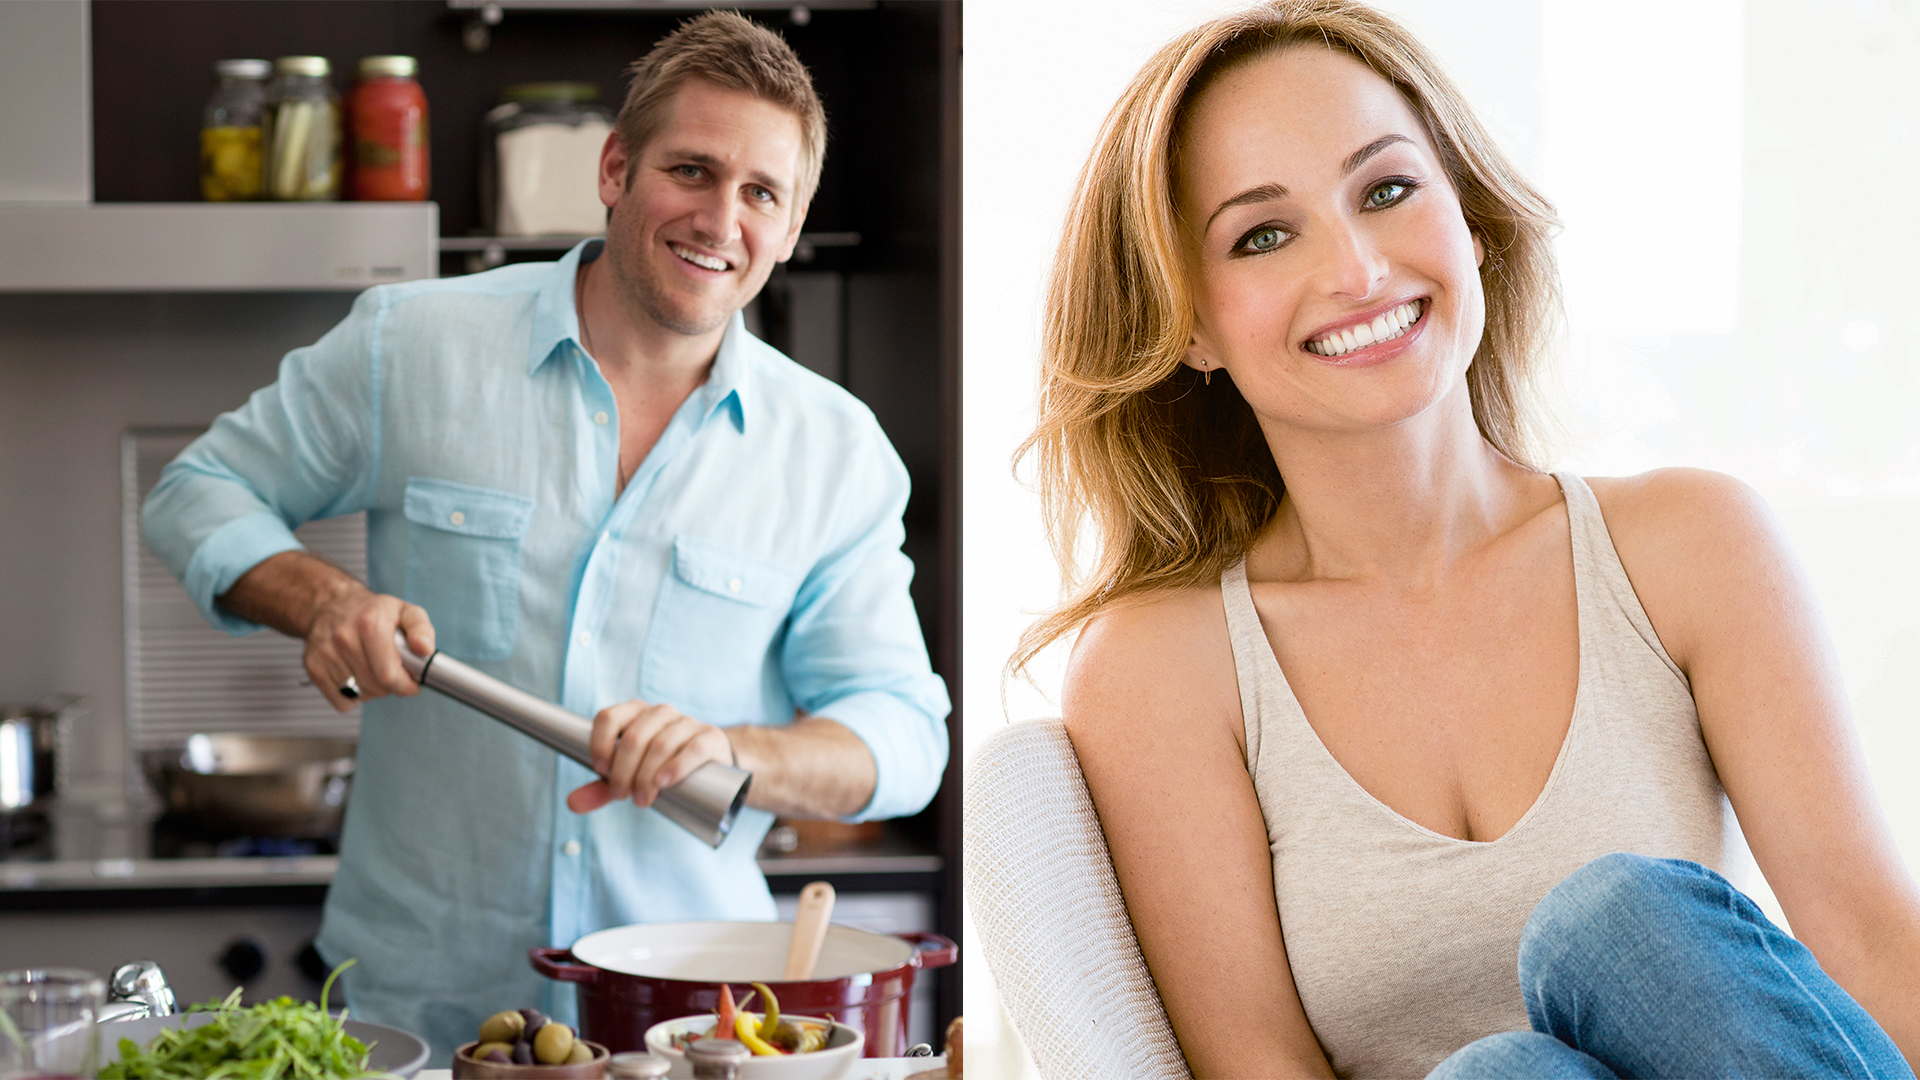 We asked 7 celebrity chefs: What's one thing you can't live without?